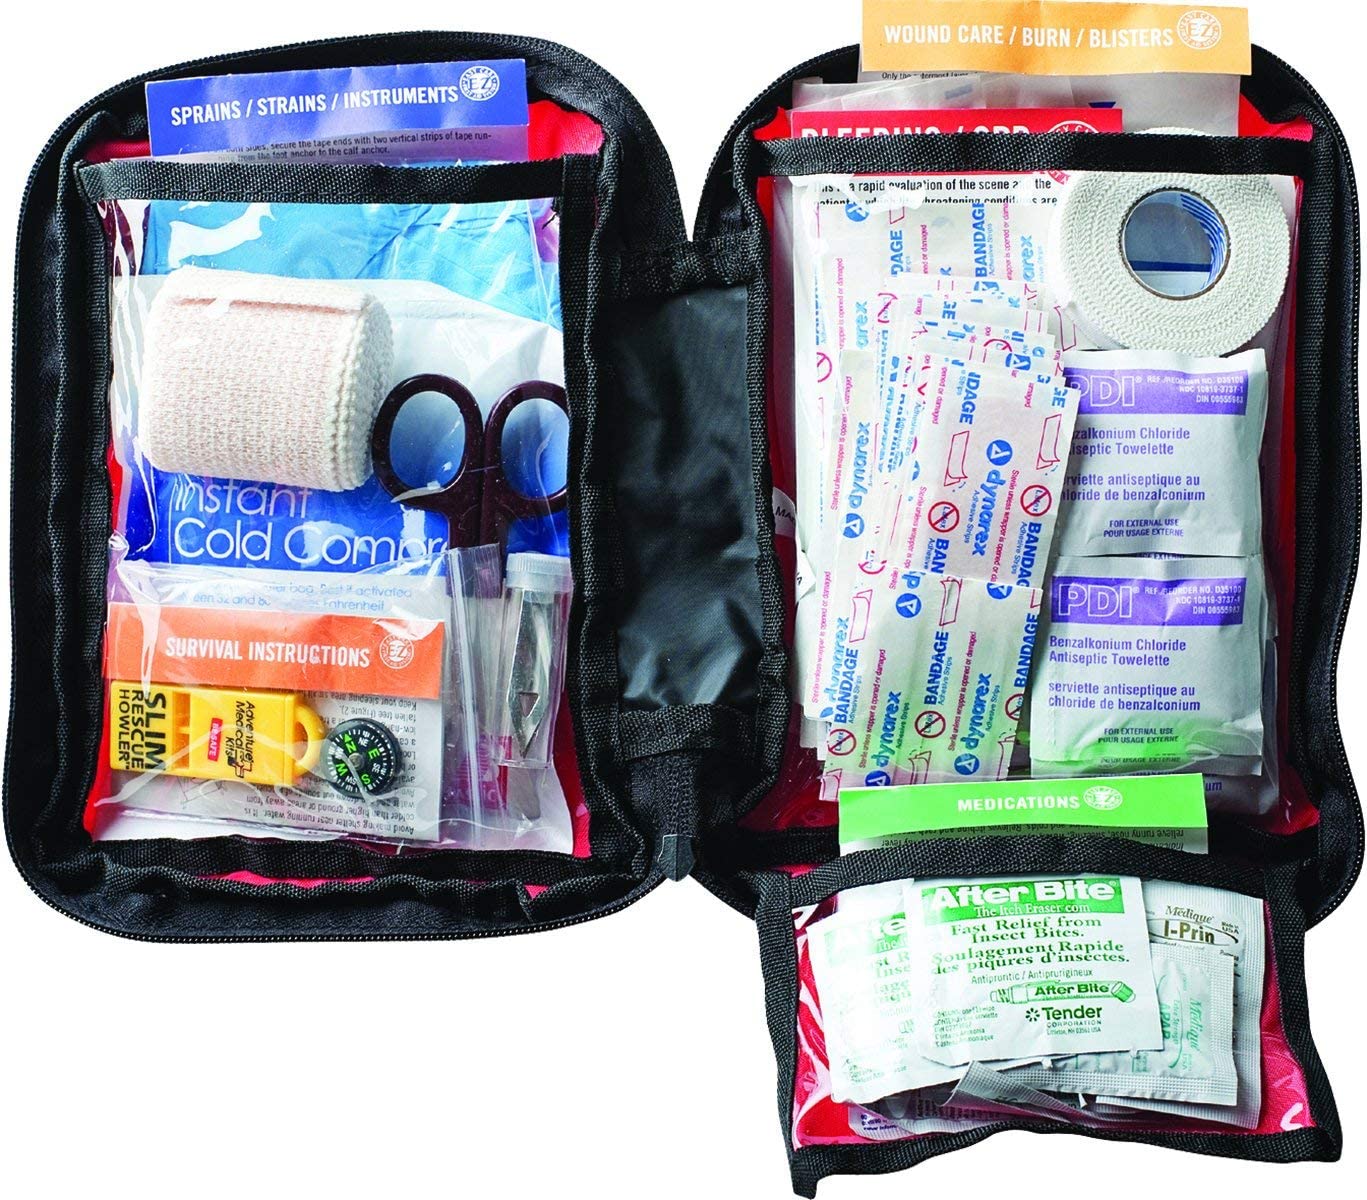 Adventure Medical Kits Adventure First Aid 2.0 First Aid Kit, Easy Care, Survival Items, Active Families, First Aid Essentials, Durable Case, Fully Stocked, 1lb 1oz - image 4 of 7